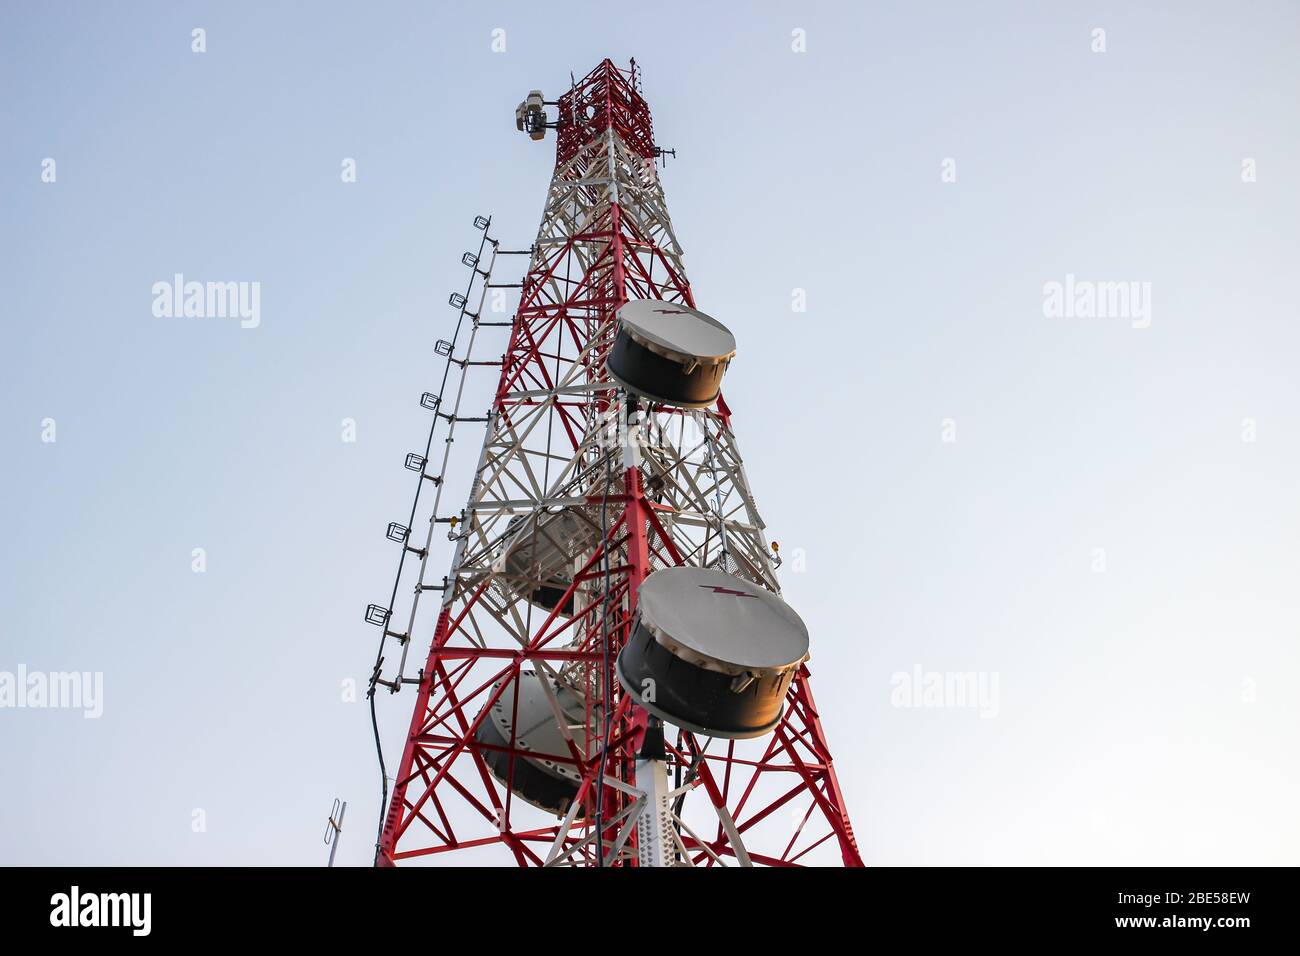 Cellular Base Station or Base Transceiver Station. Telecommunication tower. Wireless Communication Antenna Transmitter. 3G, 4G and 5G Cell Site. Stock Photo